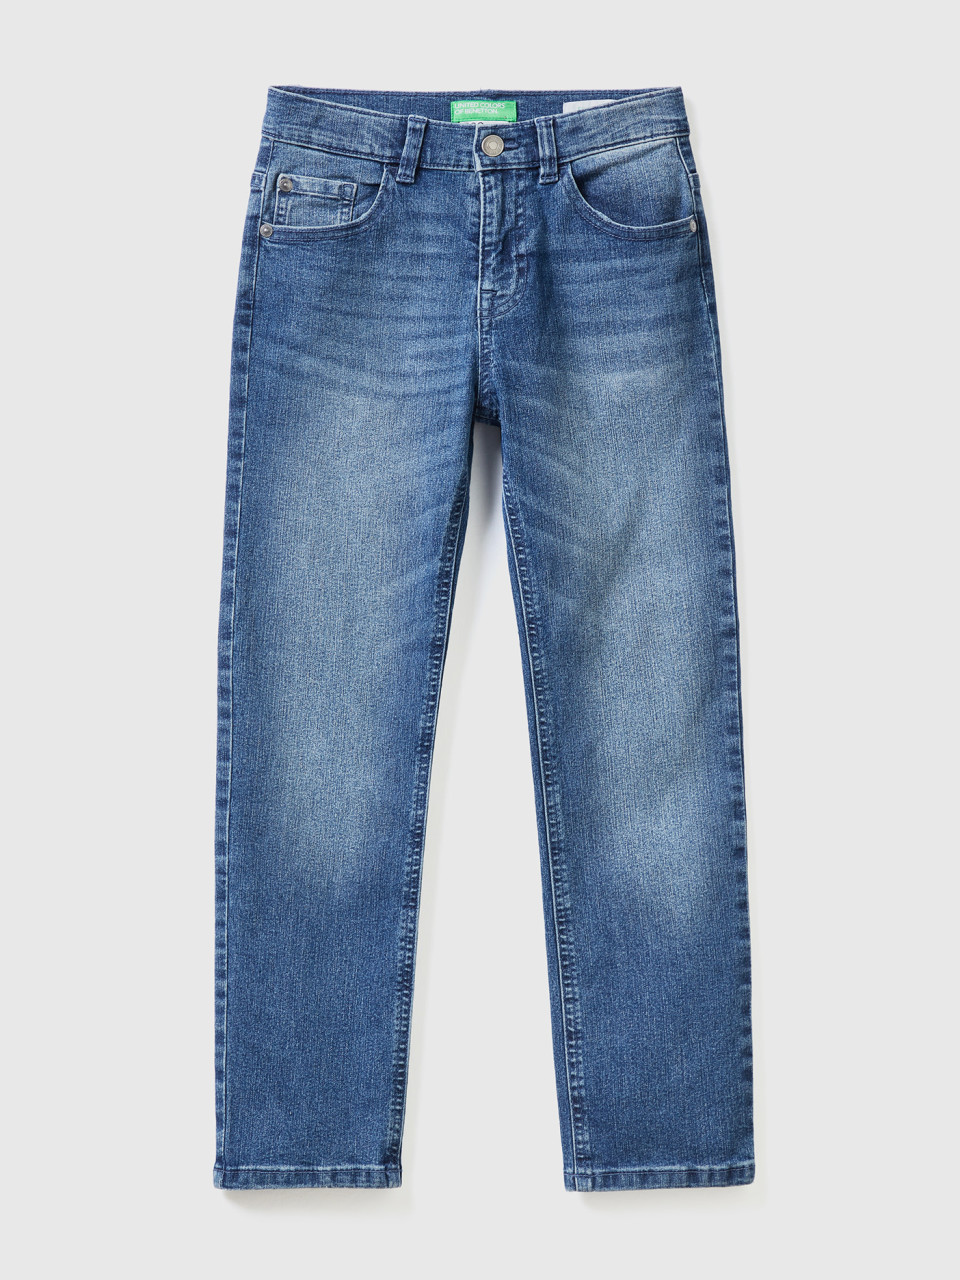 Benetton, Slim-fit-jeans eco-recycle, Dunkelblau, male